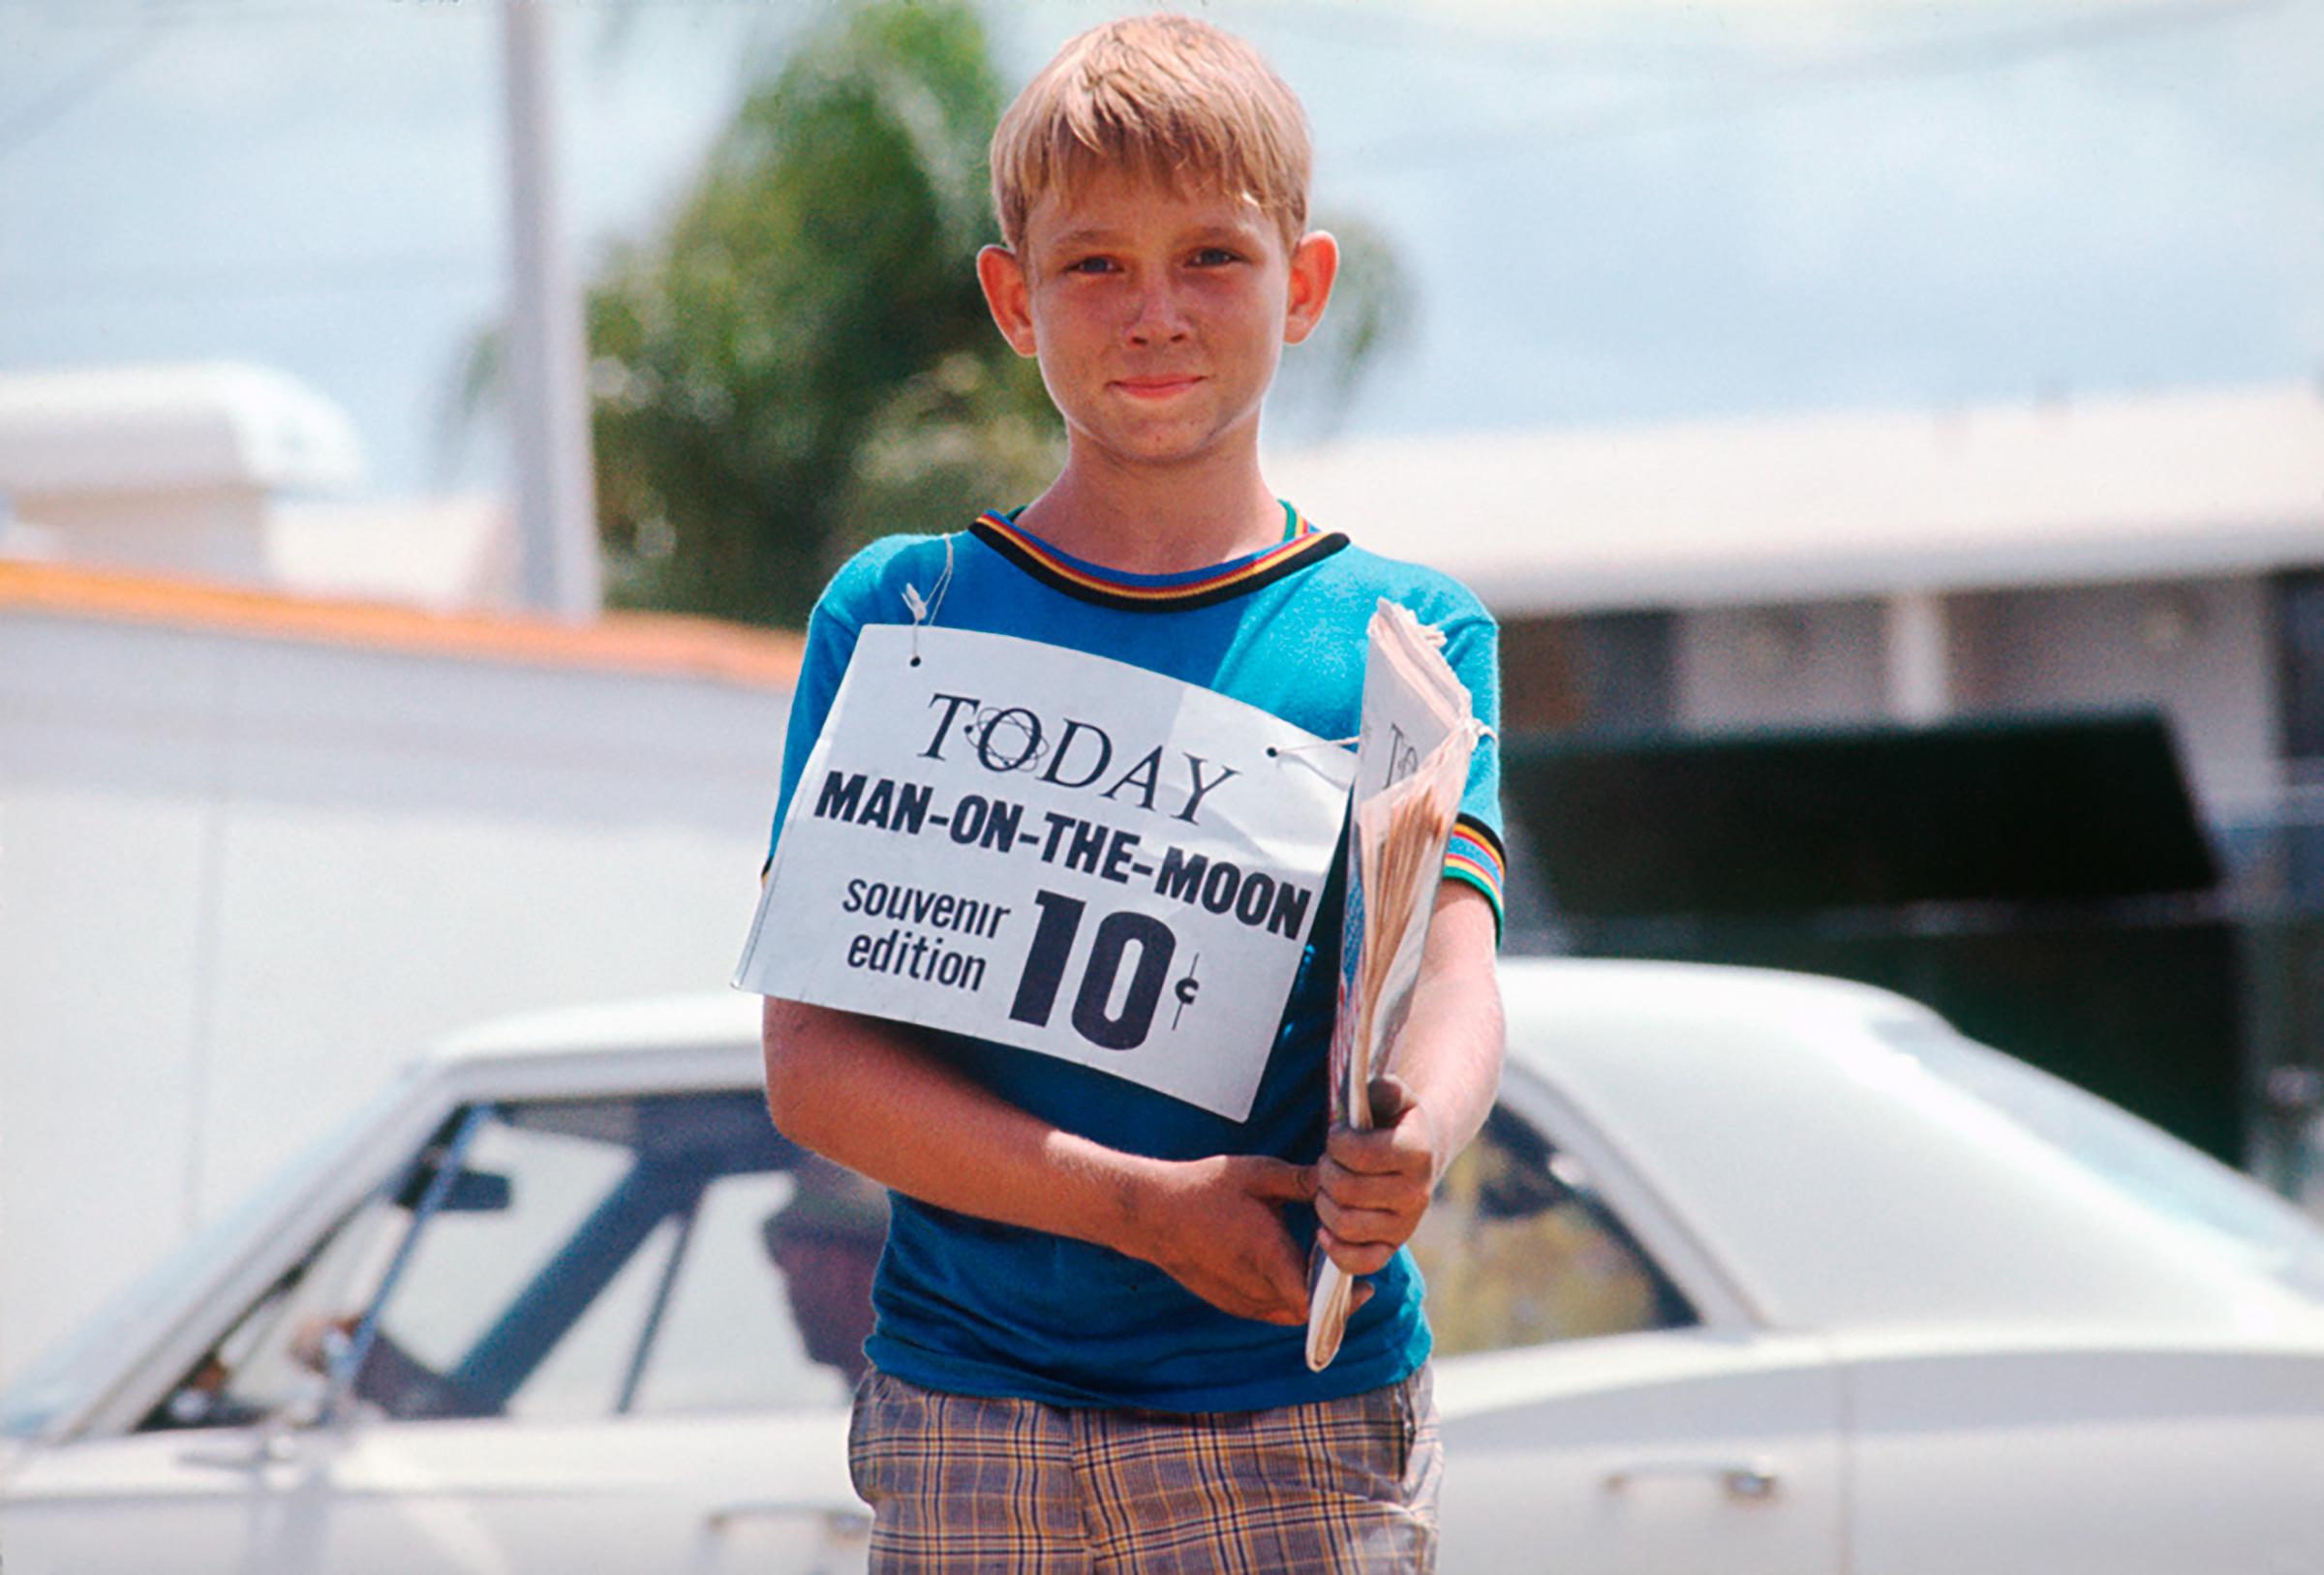 A young boy sells souvenirs in Titusville, Florida. (David Burnett —Contact Press Images for TIME)